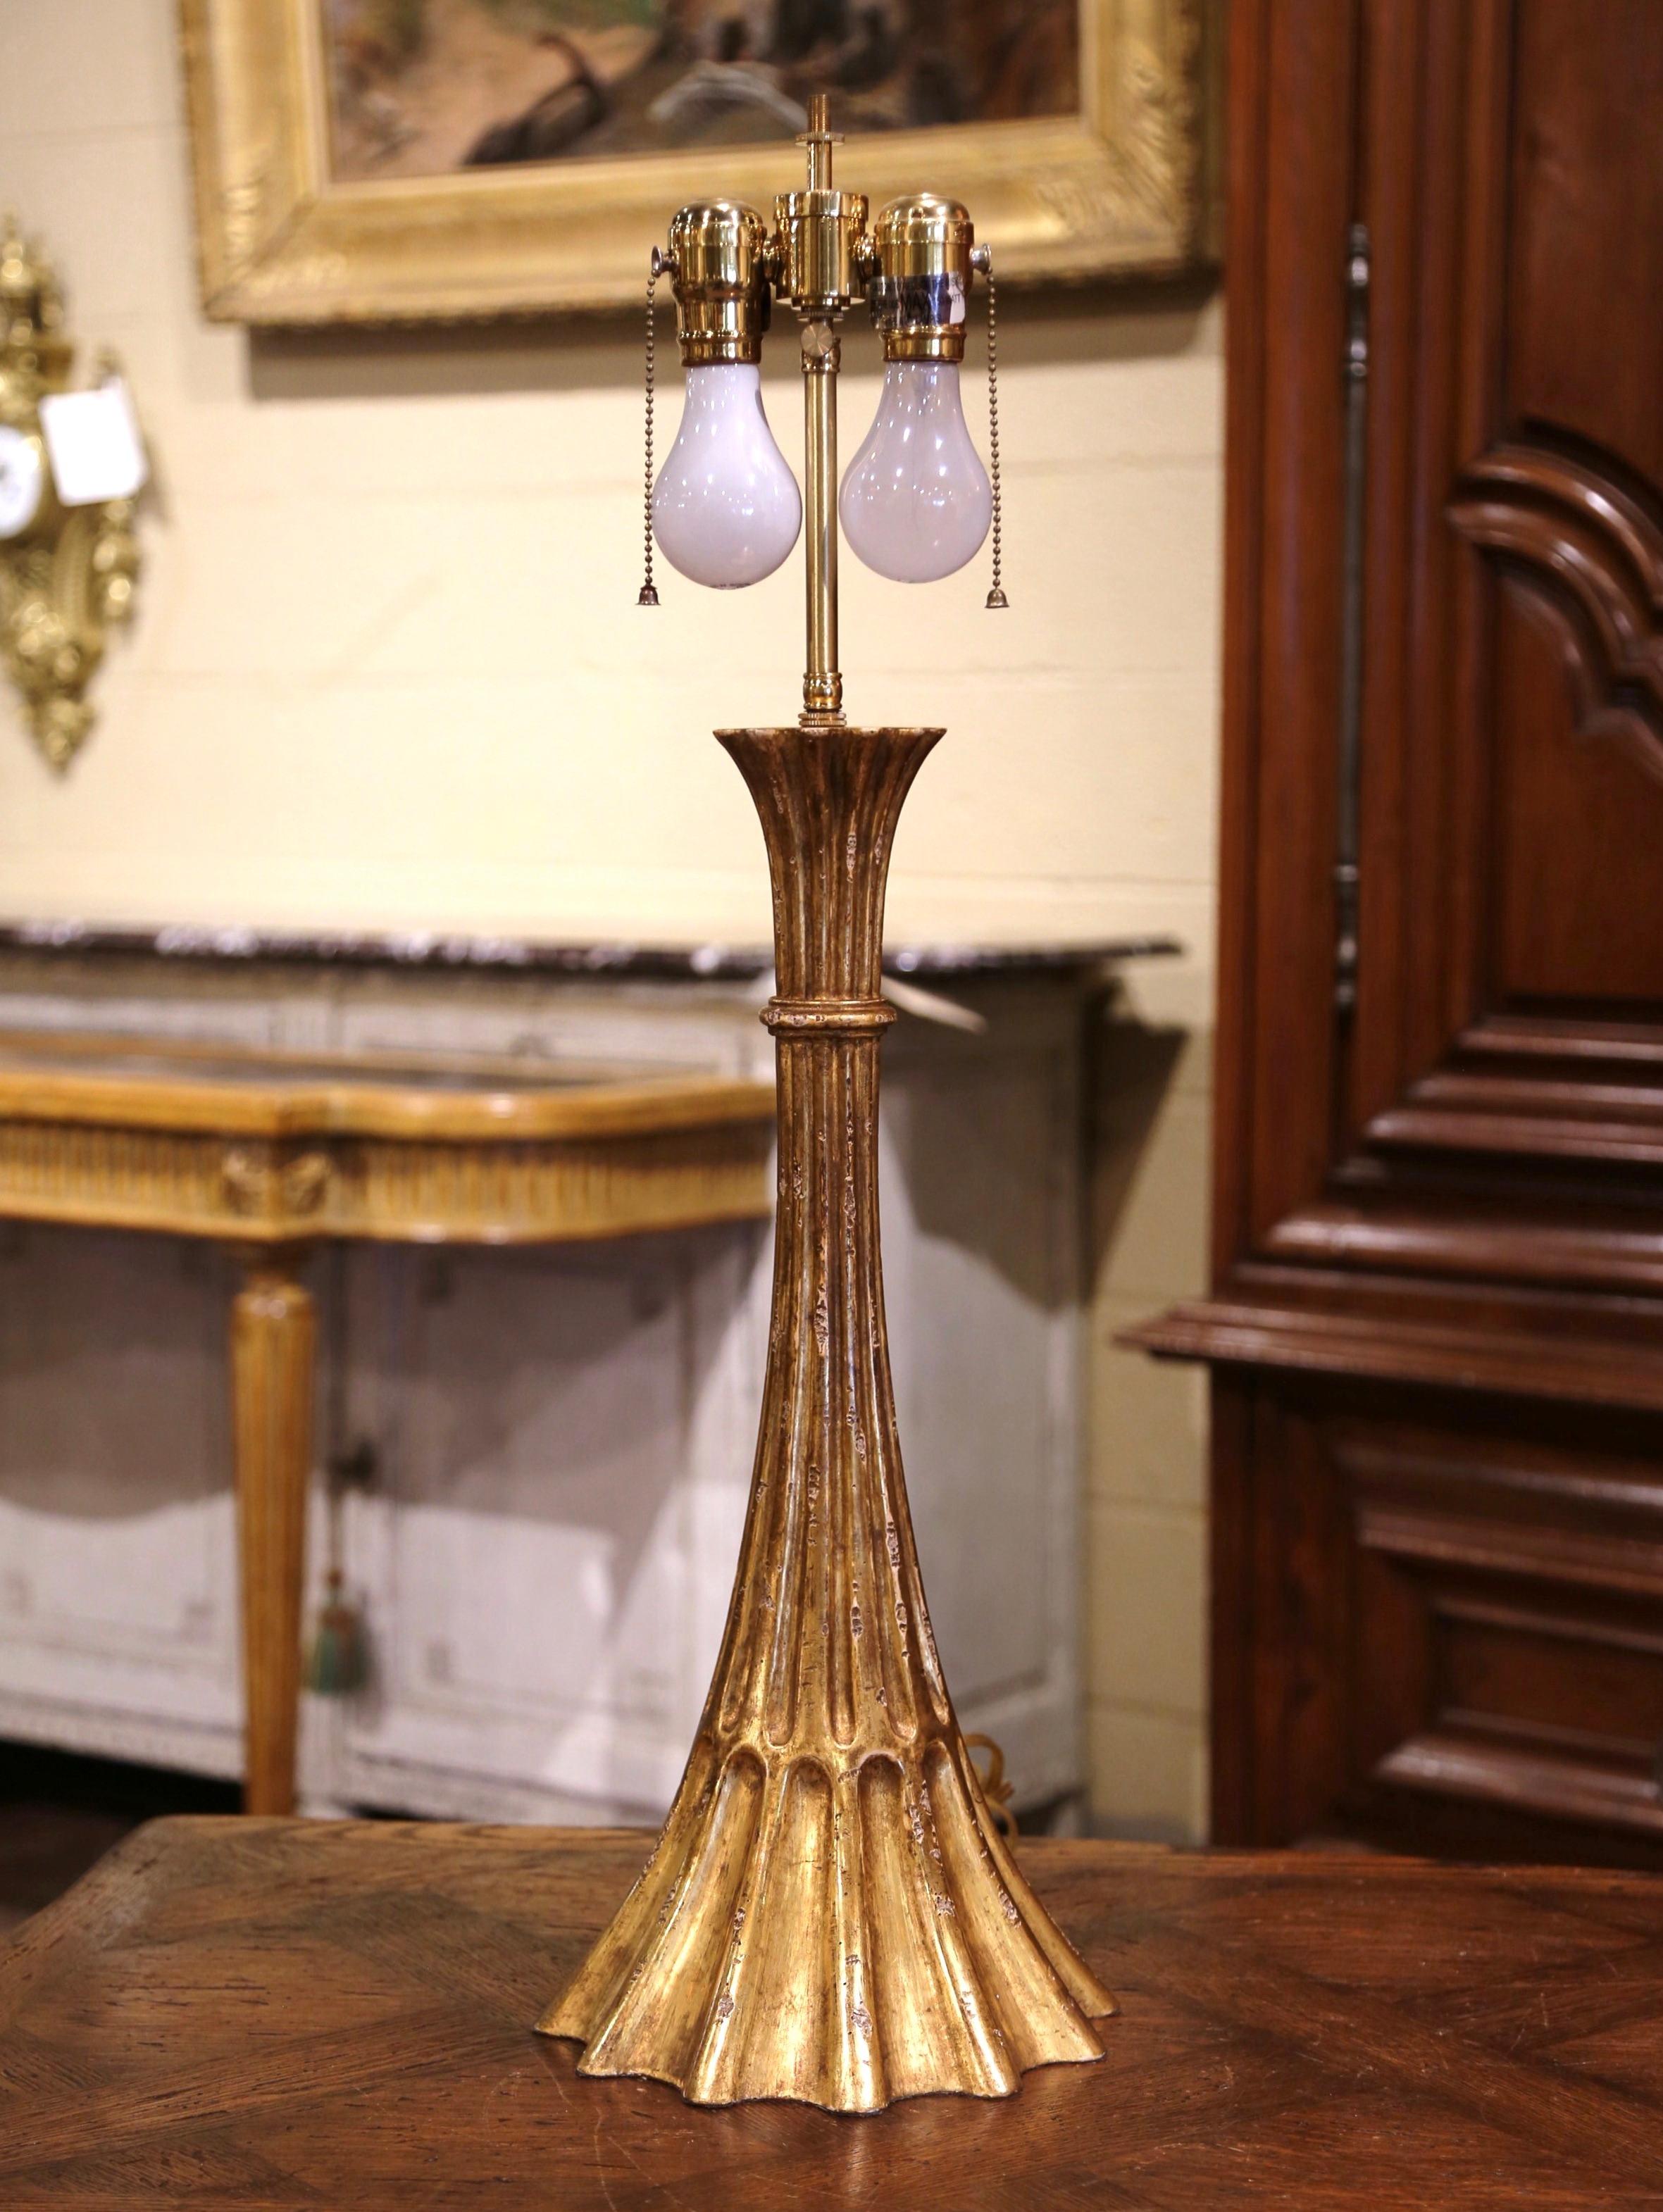 Hand carved in France circa 1960, the antique lamp base features a cone shape with spline decor, and adorns a beautiful gilt finish; it has a custom creamy shade with gold trim. The elegant table lamp is in excellent condition with dual lights, and